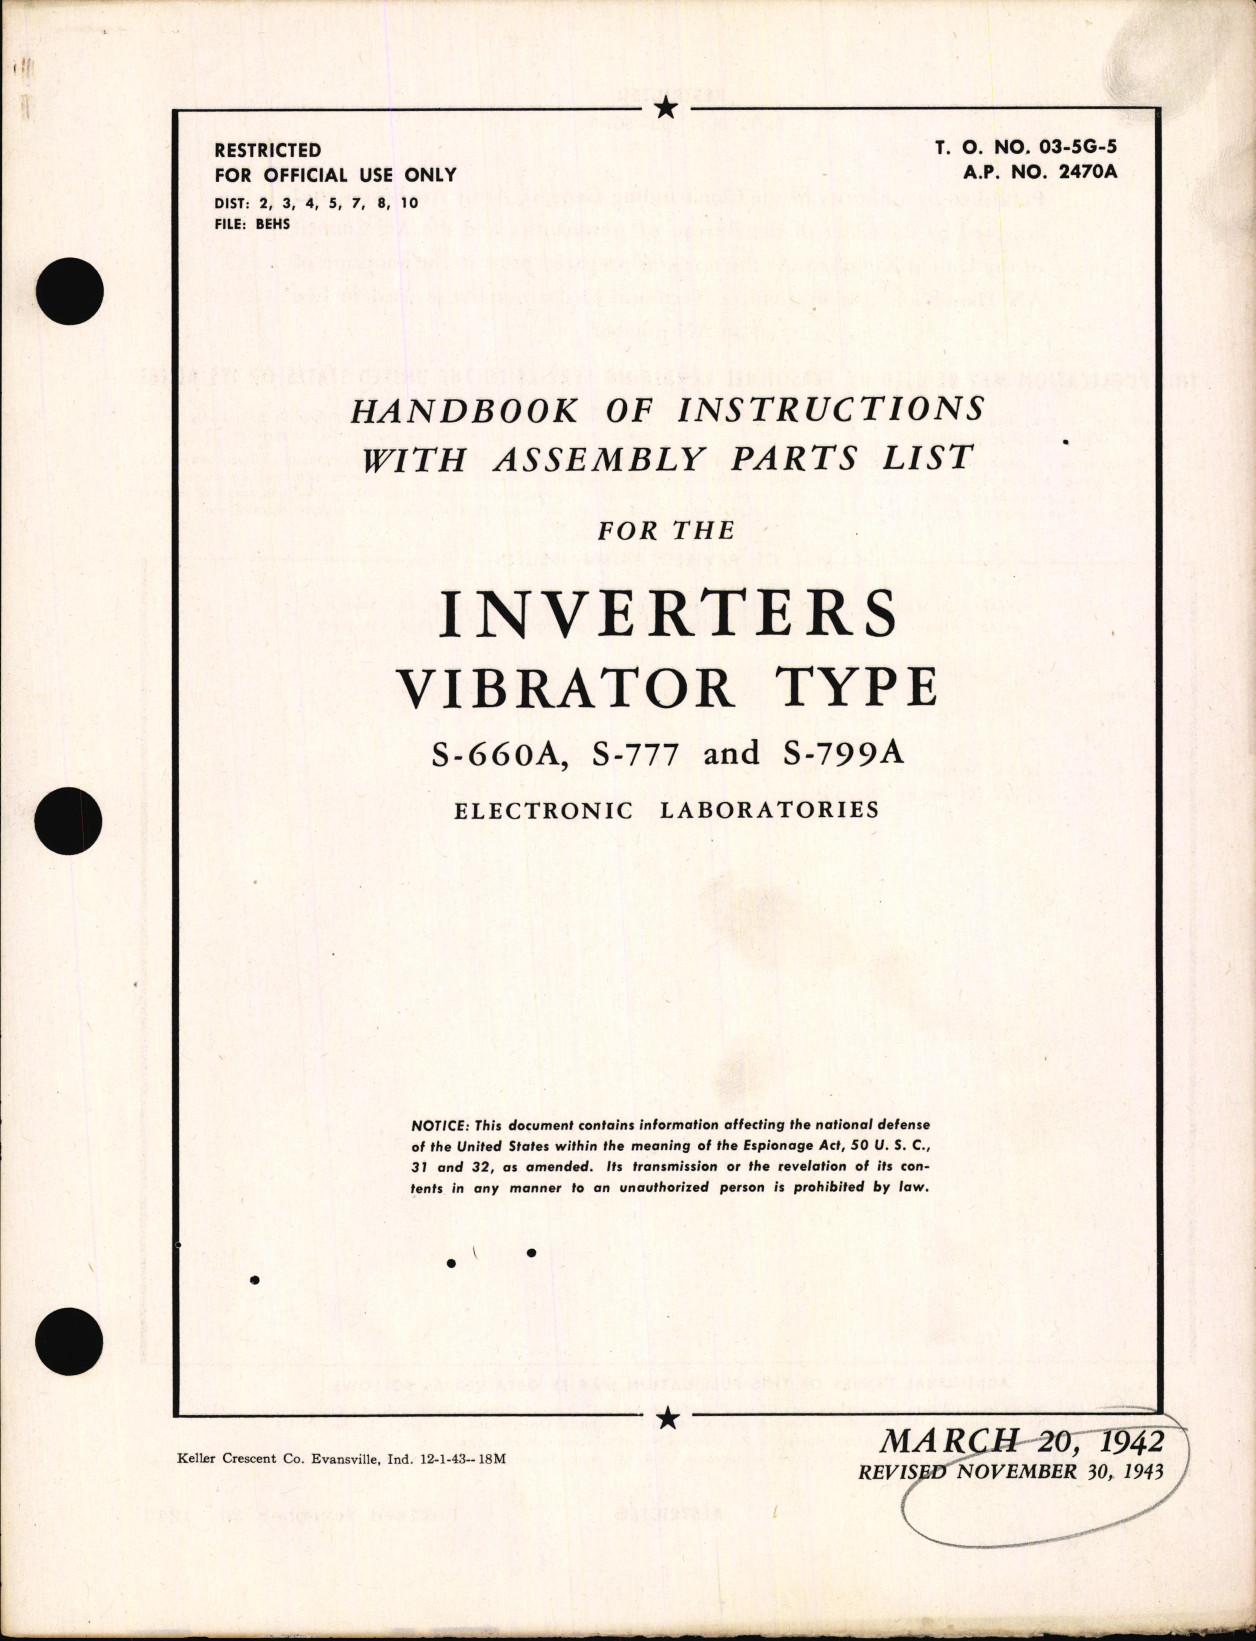 Sample page 1 from AirCorps Library document: Handbook of Instructions with Assembly Parts List for Inverters Vibrator Type S-660A, S-777, and S-799A